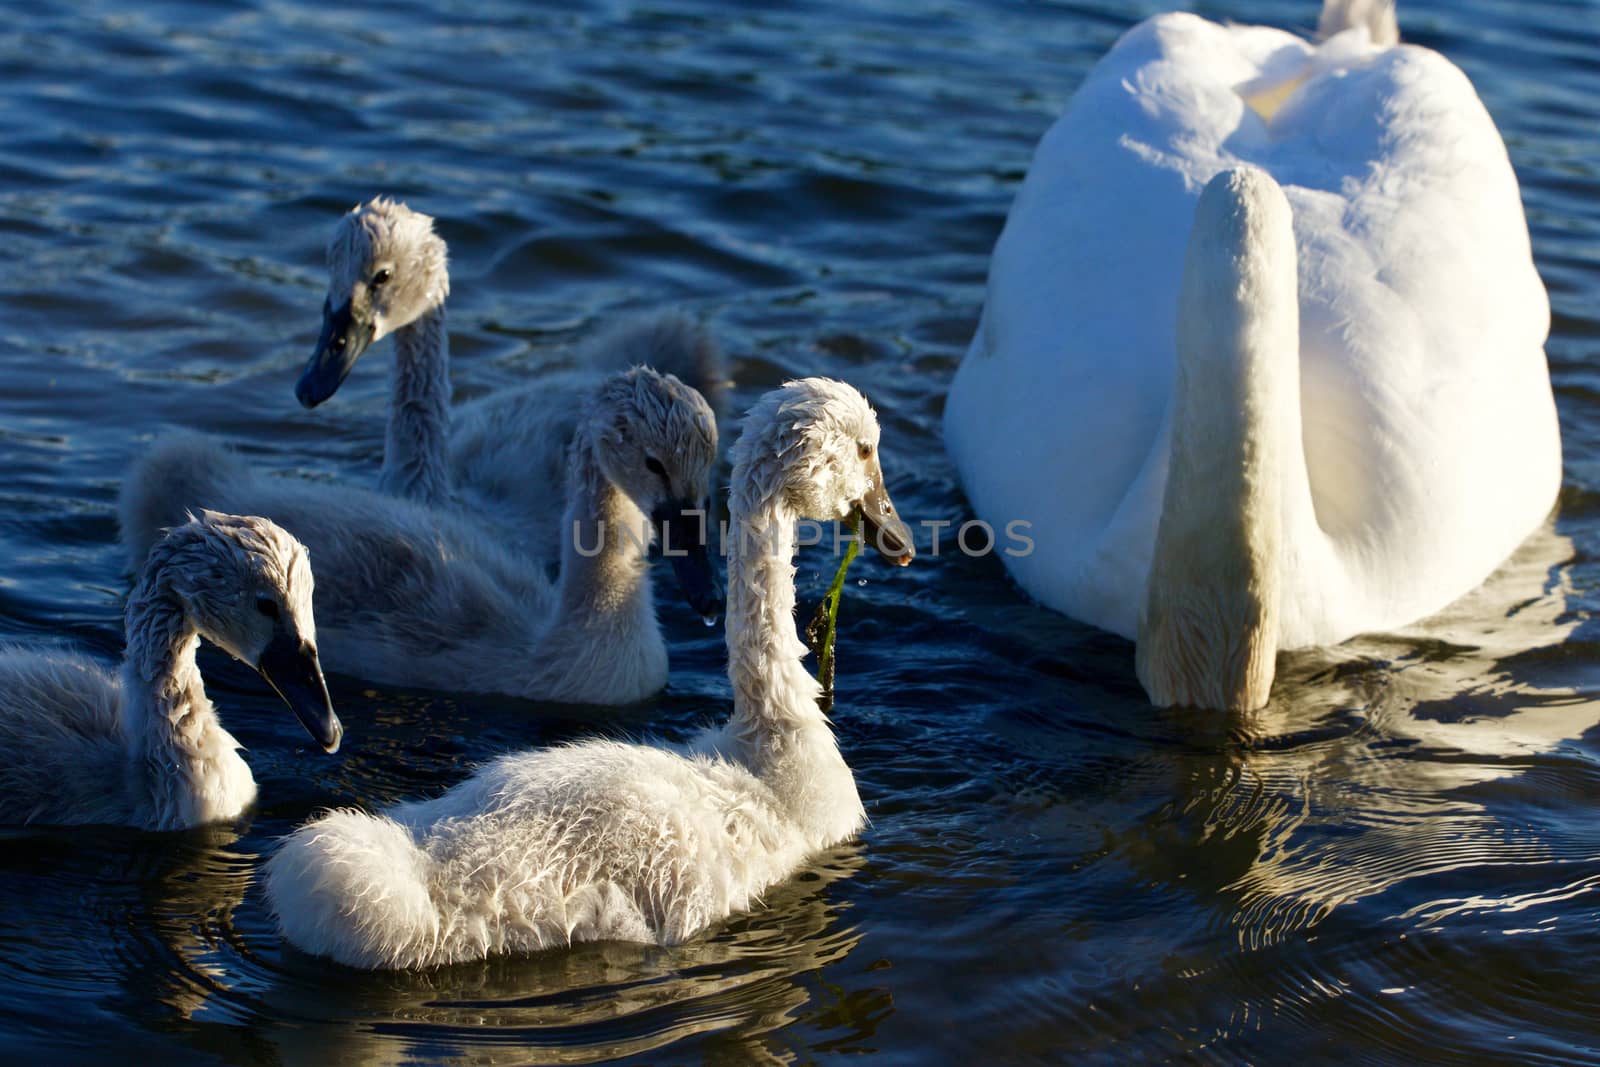 The swans family is swimming together